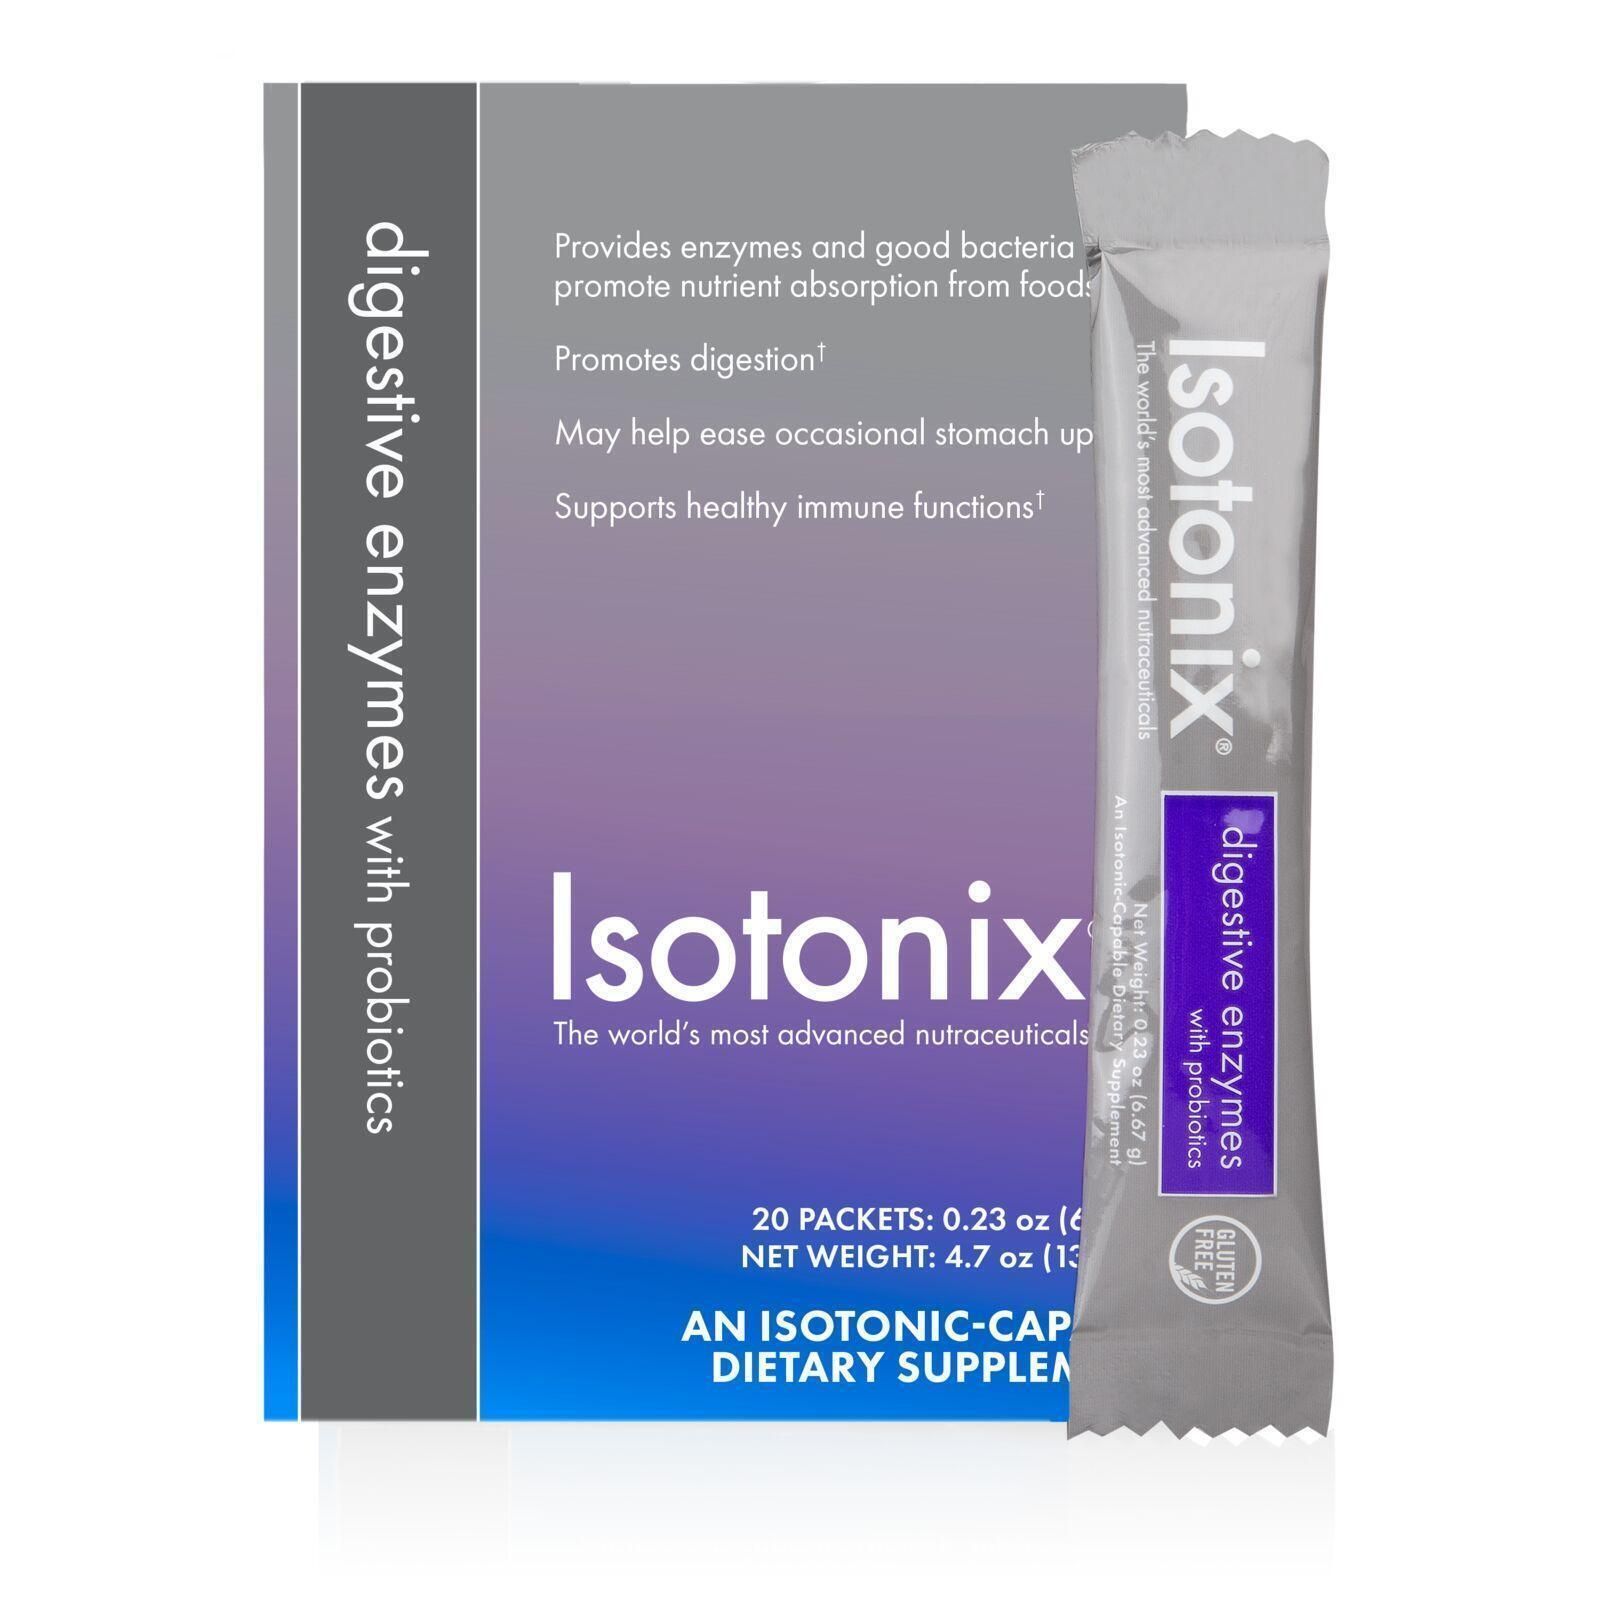 A box of isotonix digestive enzymes with probiotics